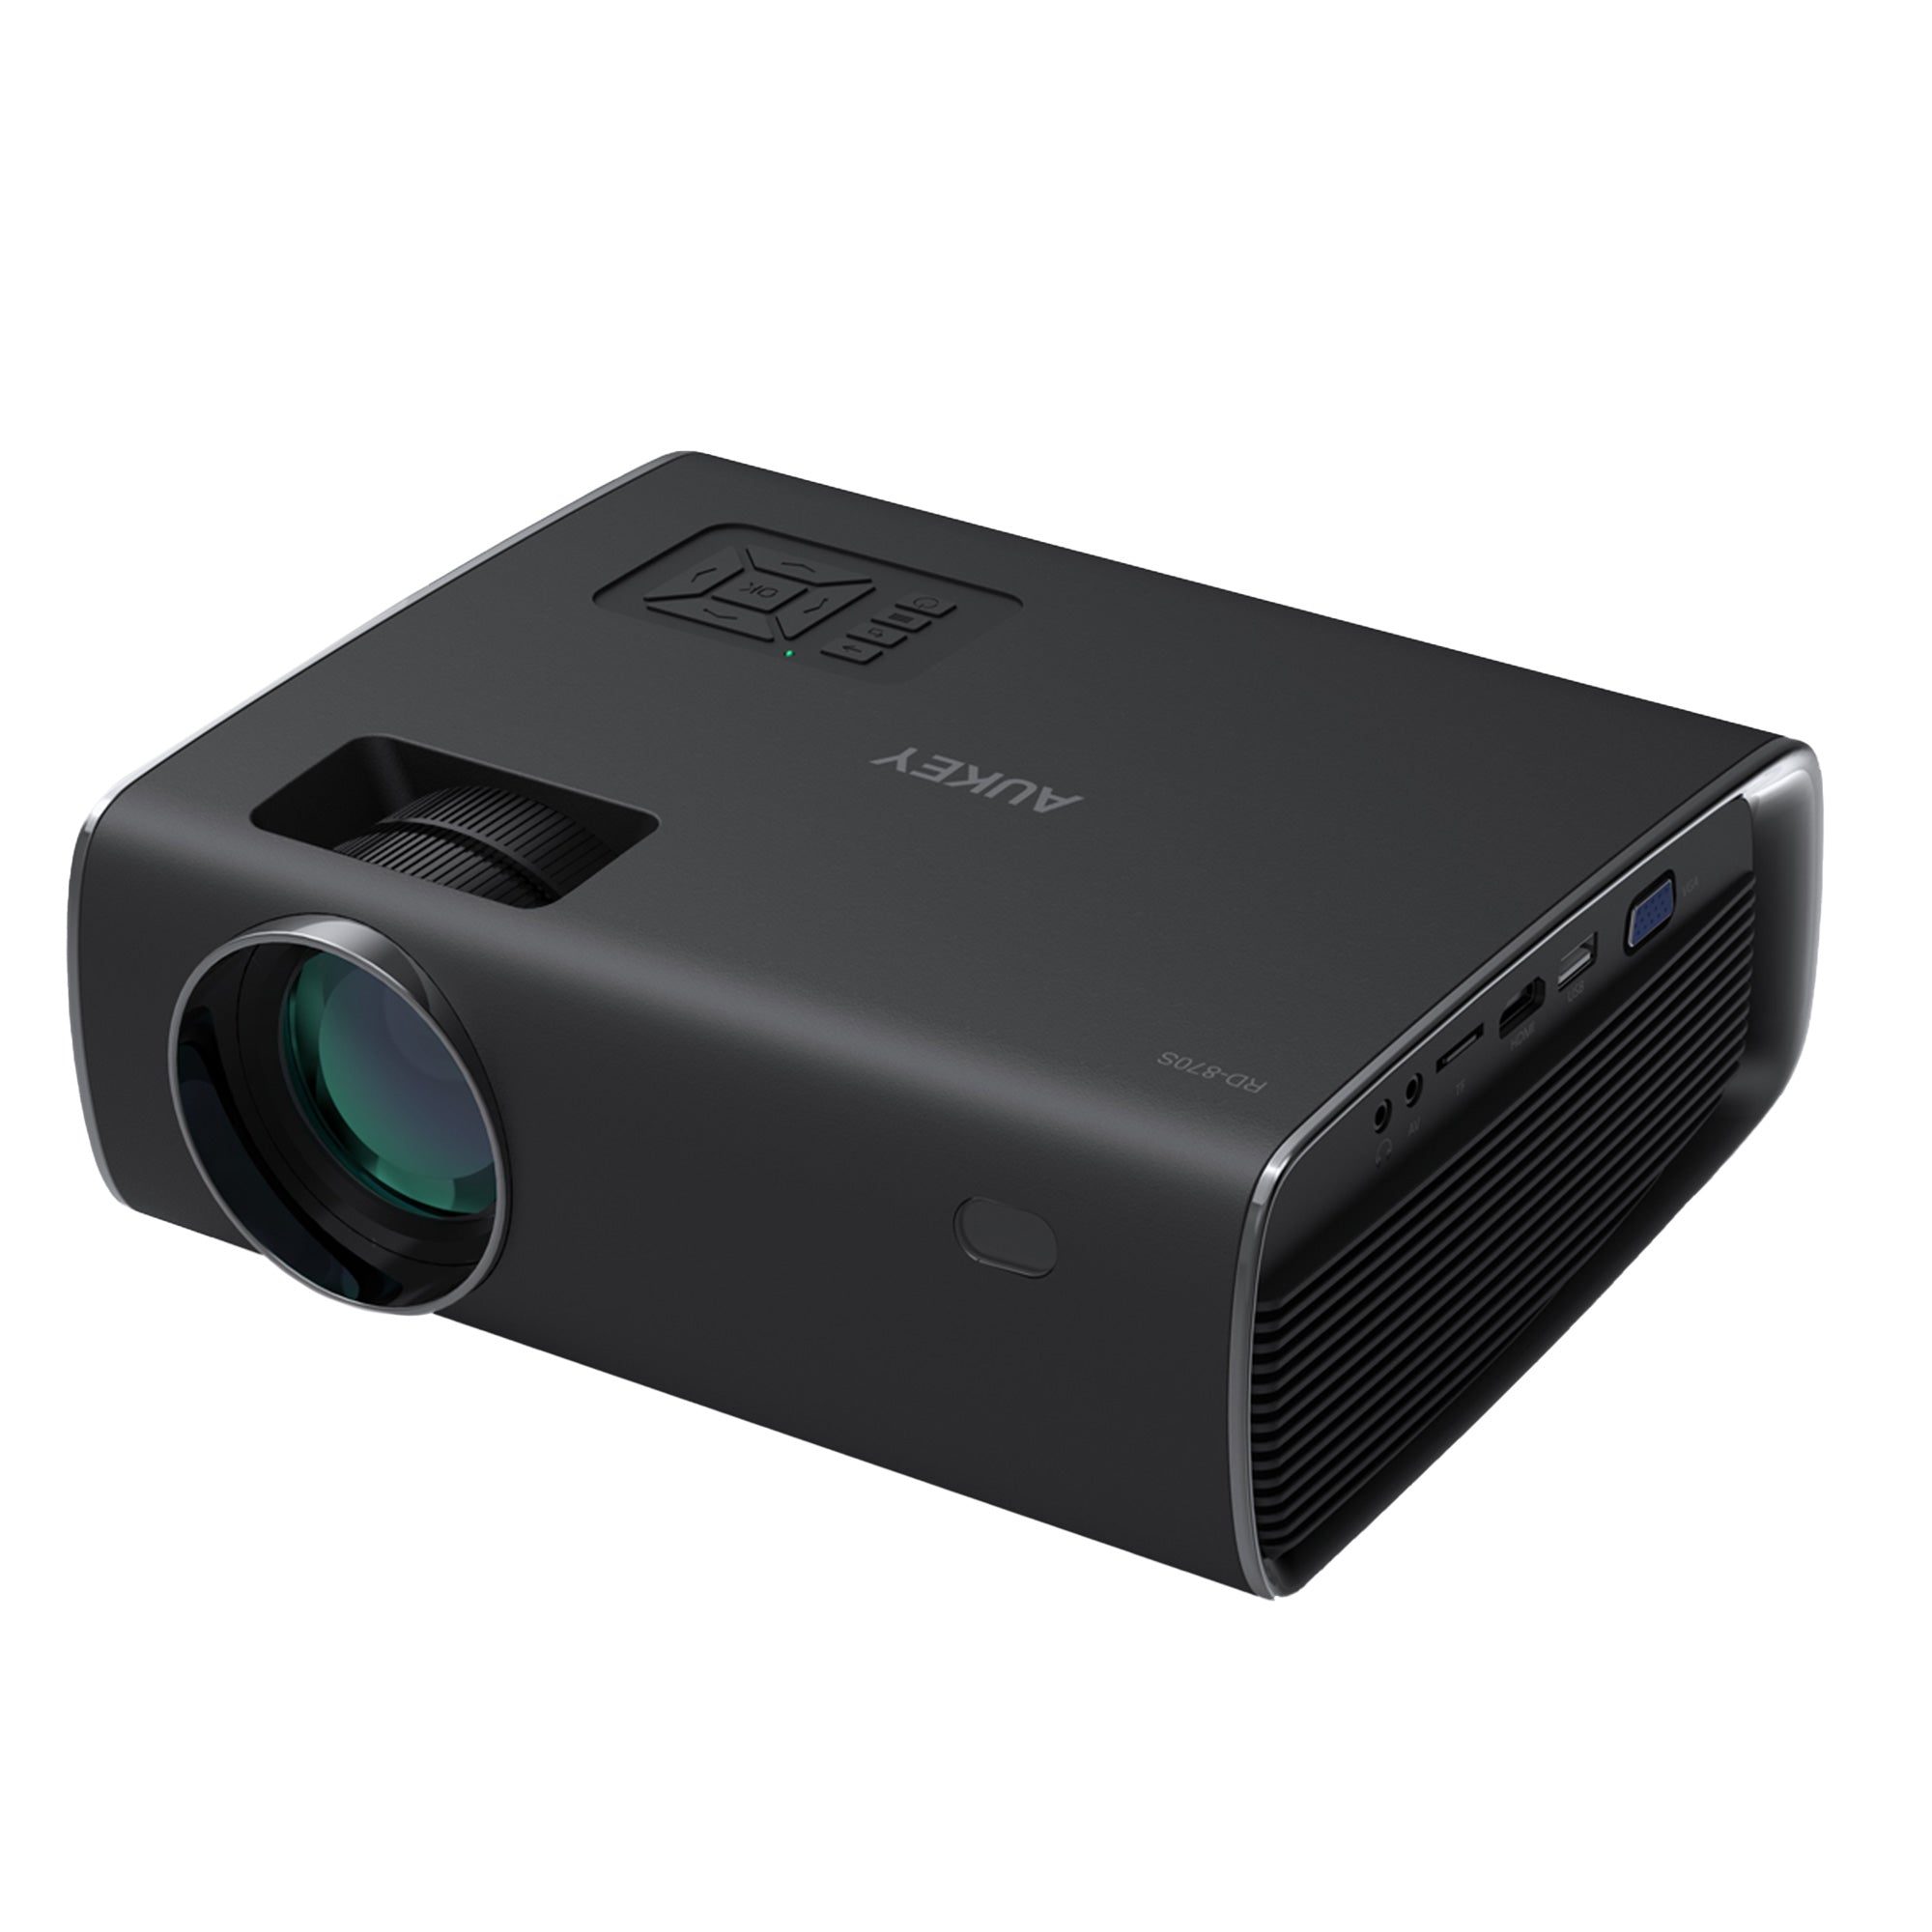 RD-870S Cinex S Lite Full HD 1080P Android Build in LED Projector with Support Smartphone Screen Sync HDMI